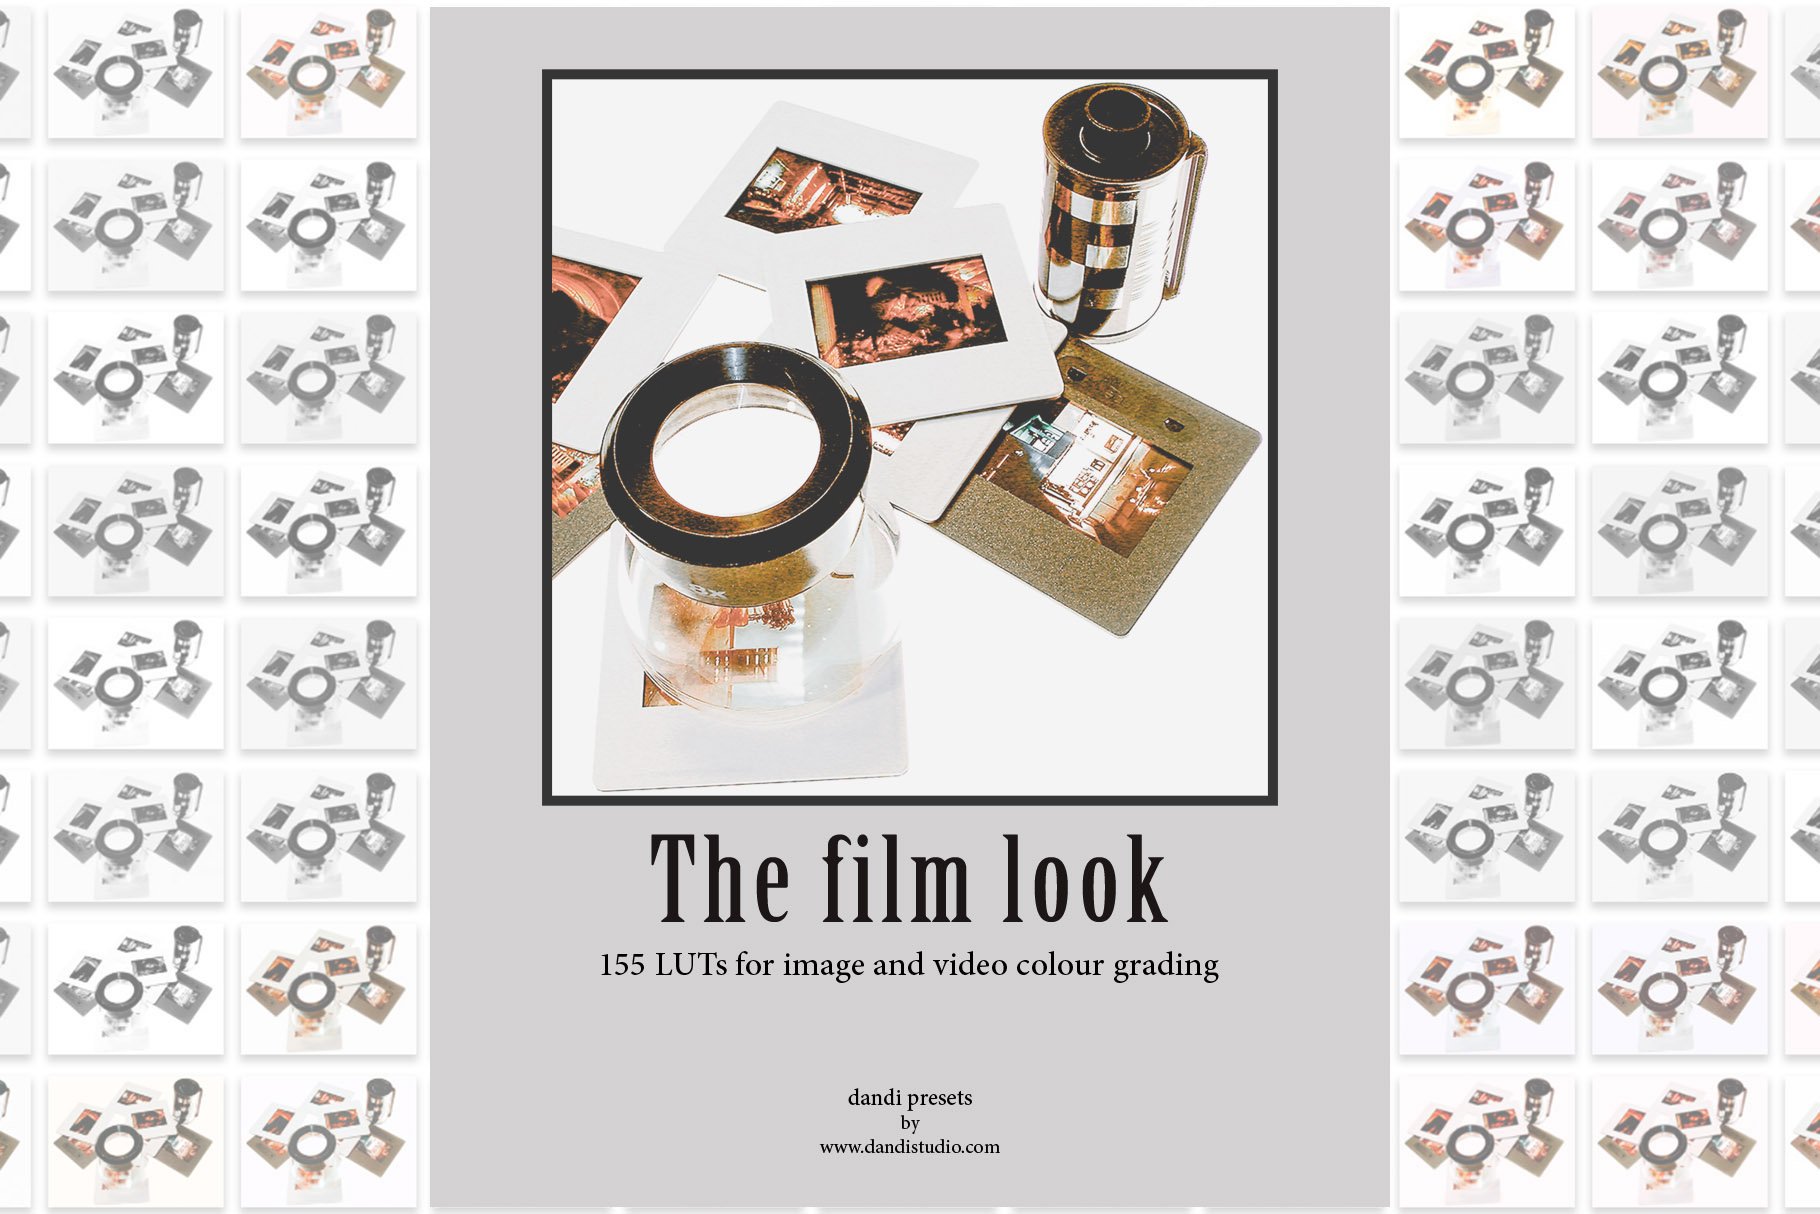 The film look LUTs Adobe(1998)cover image.